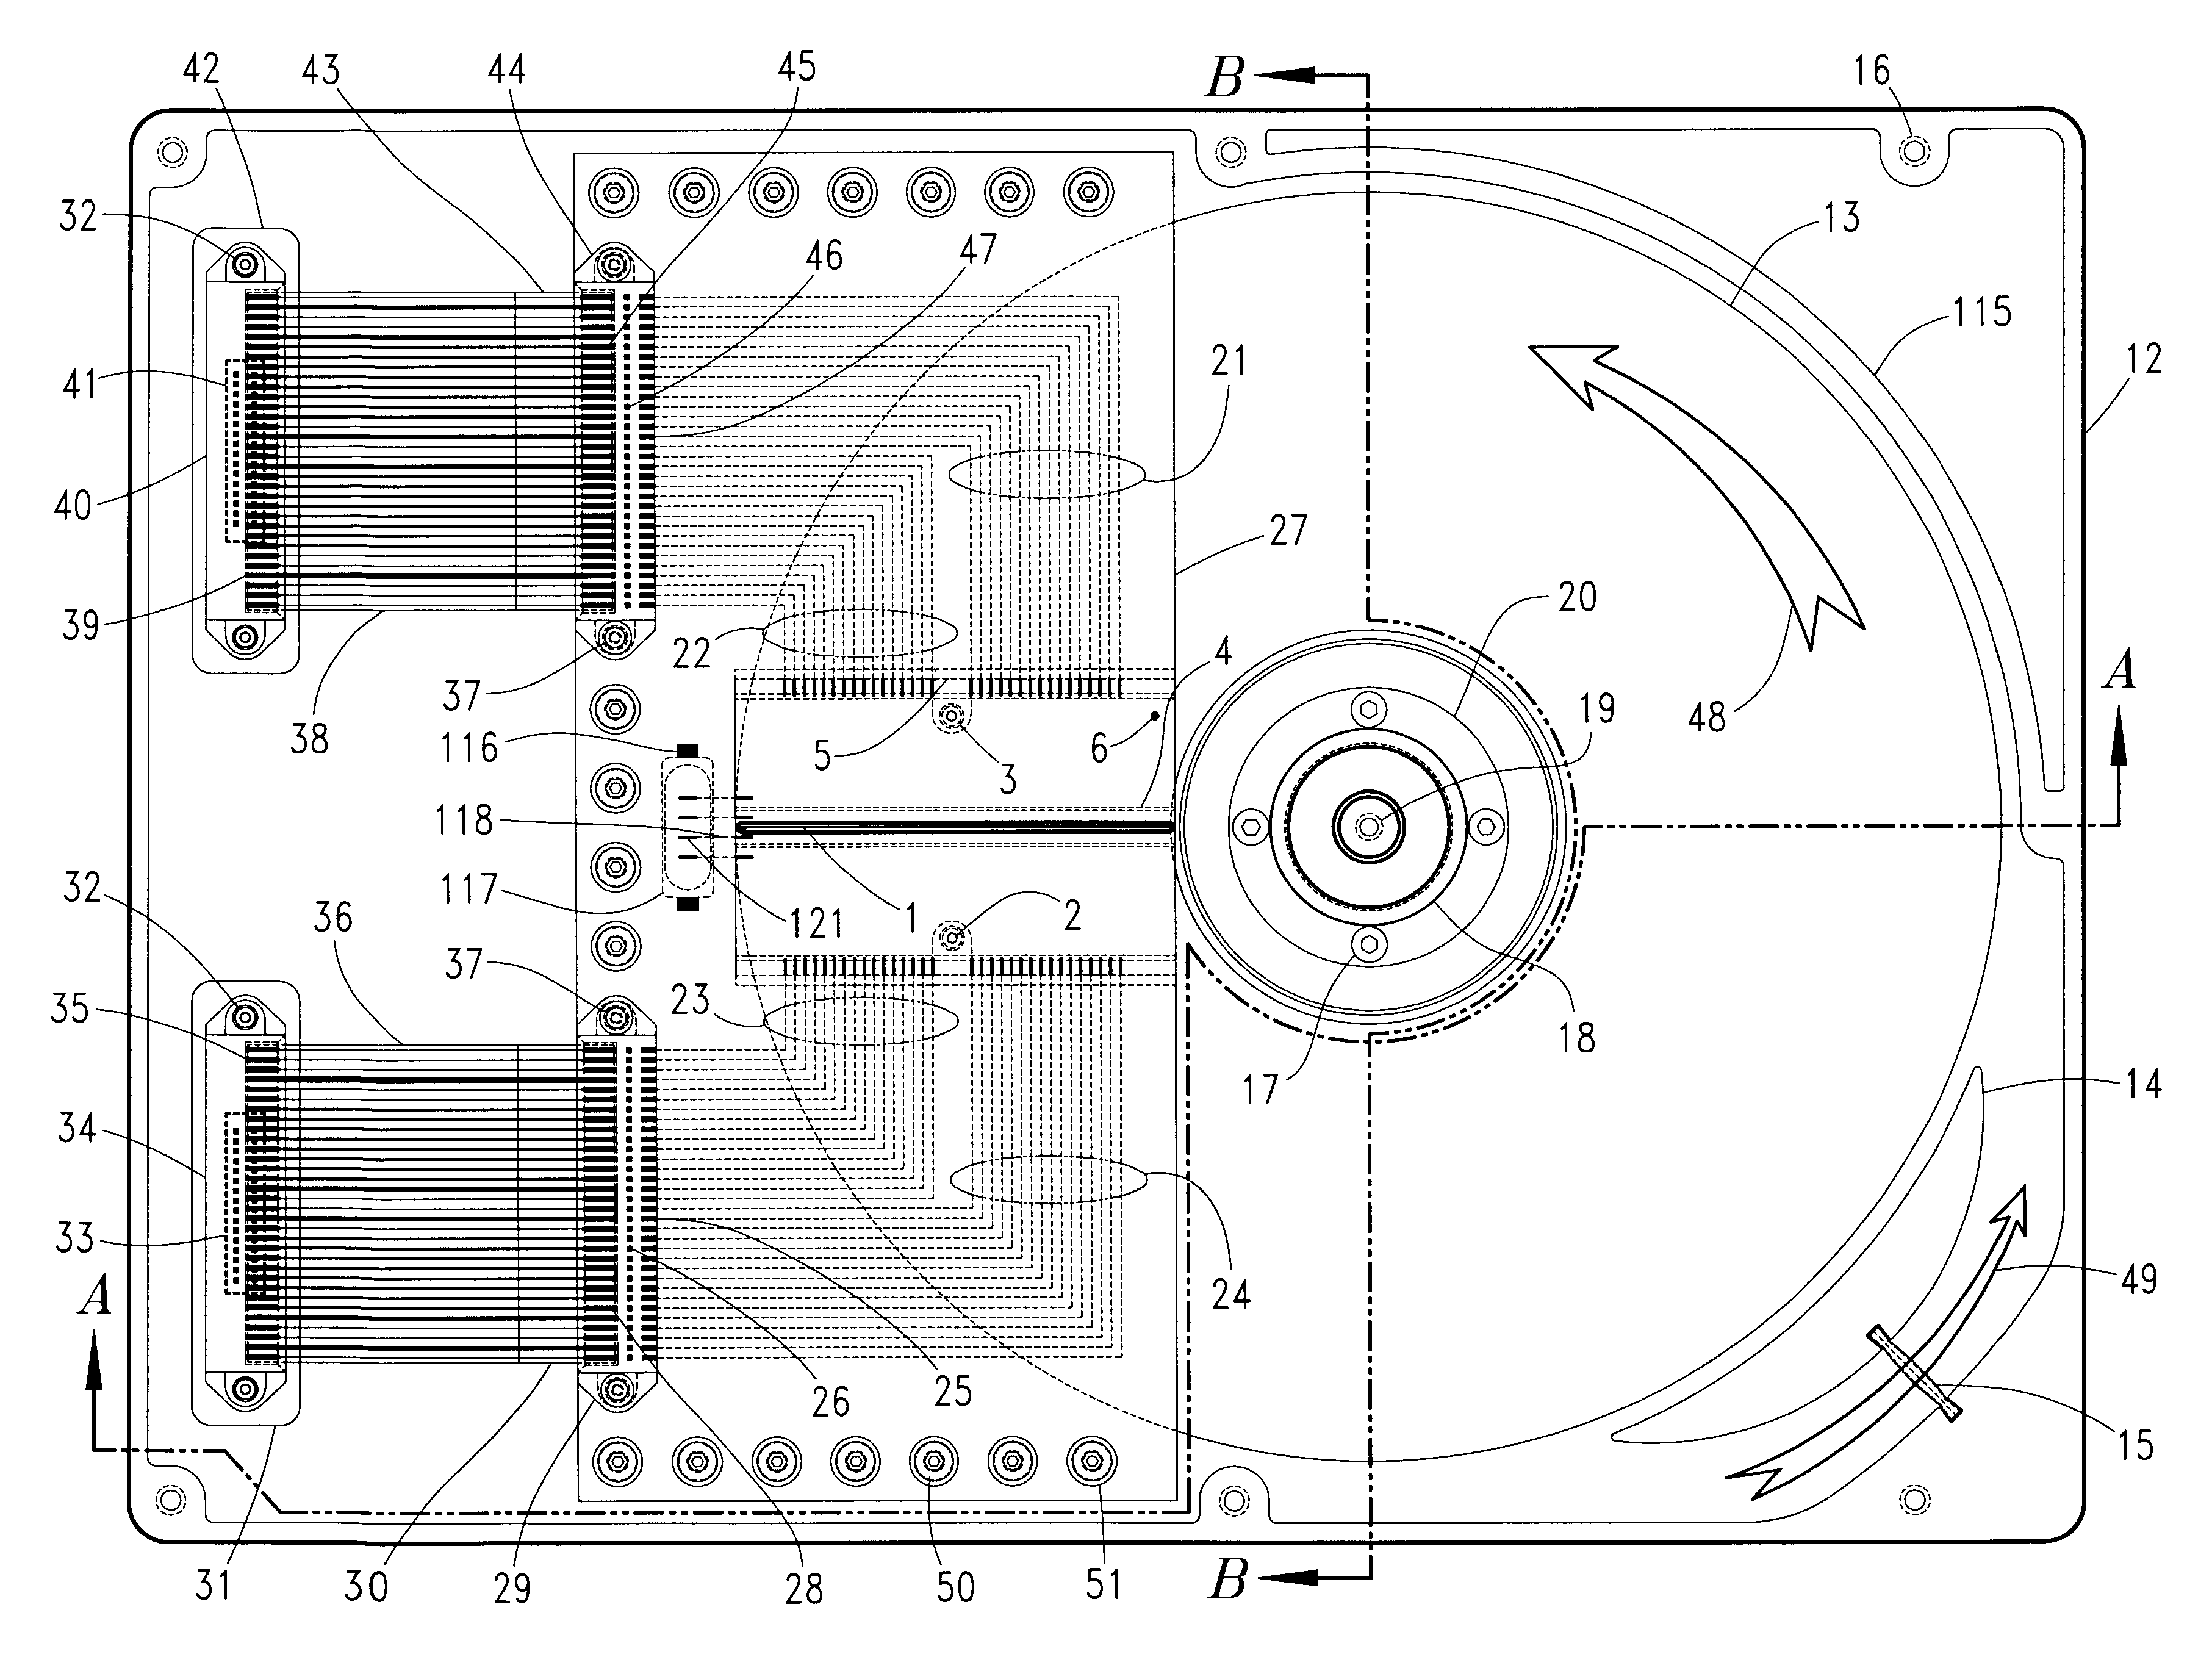 Optical data storage fixed hard disk drive using stationary magneto-optical microhead array chips in place of flying-heads and rotary voice-coil actuators